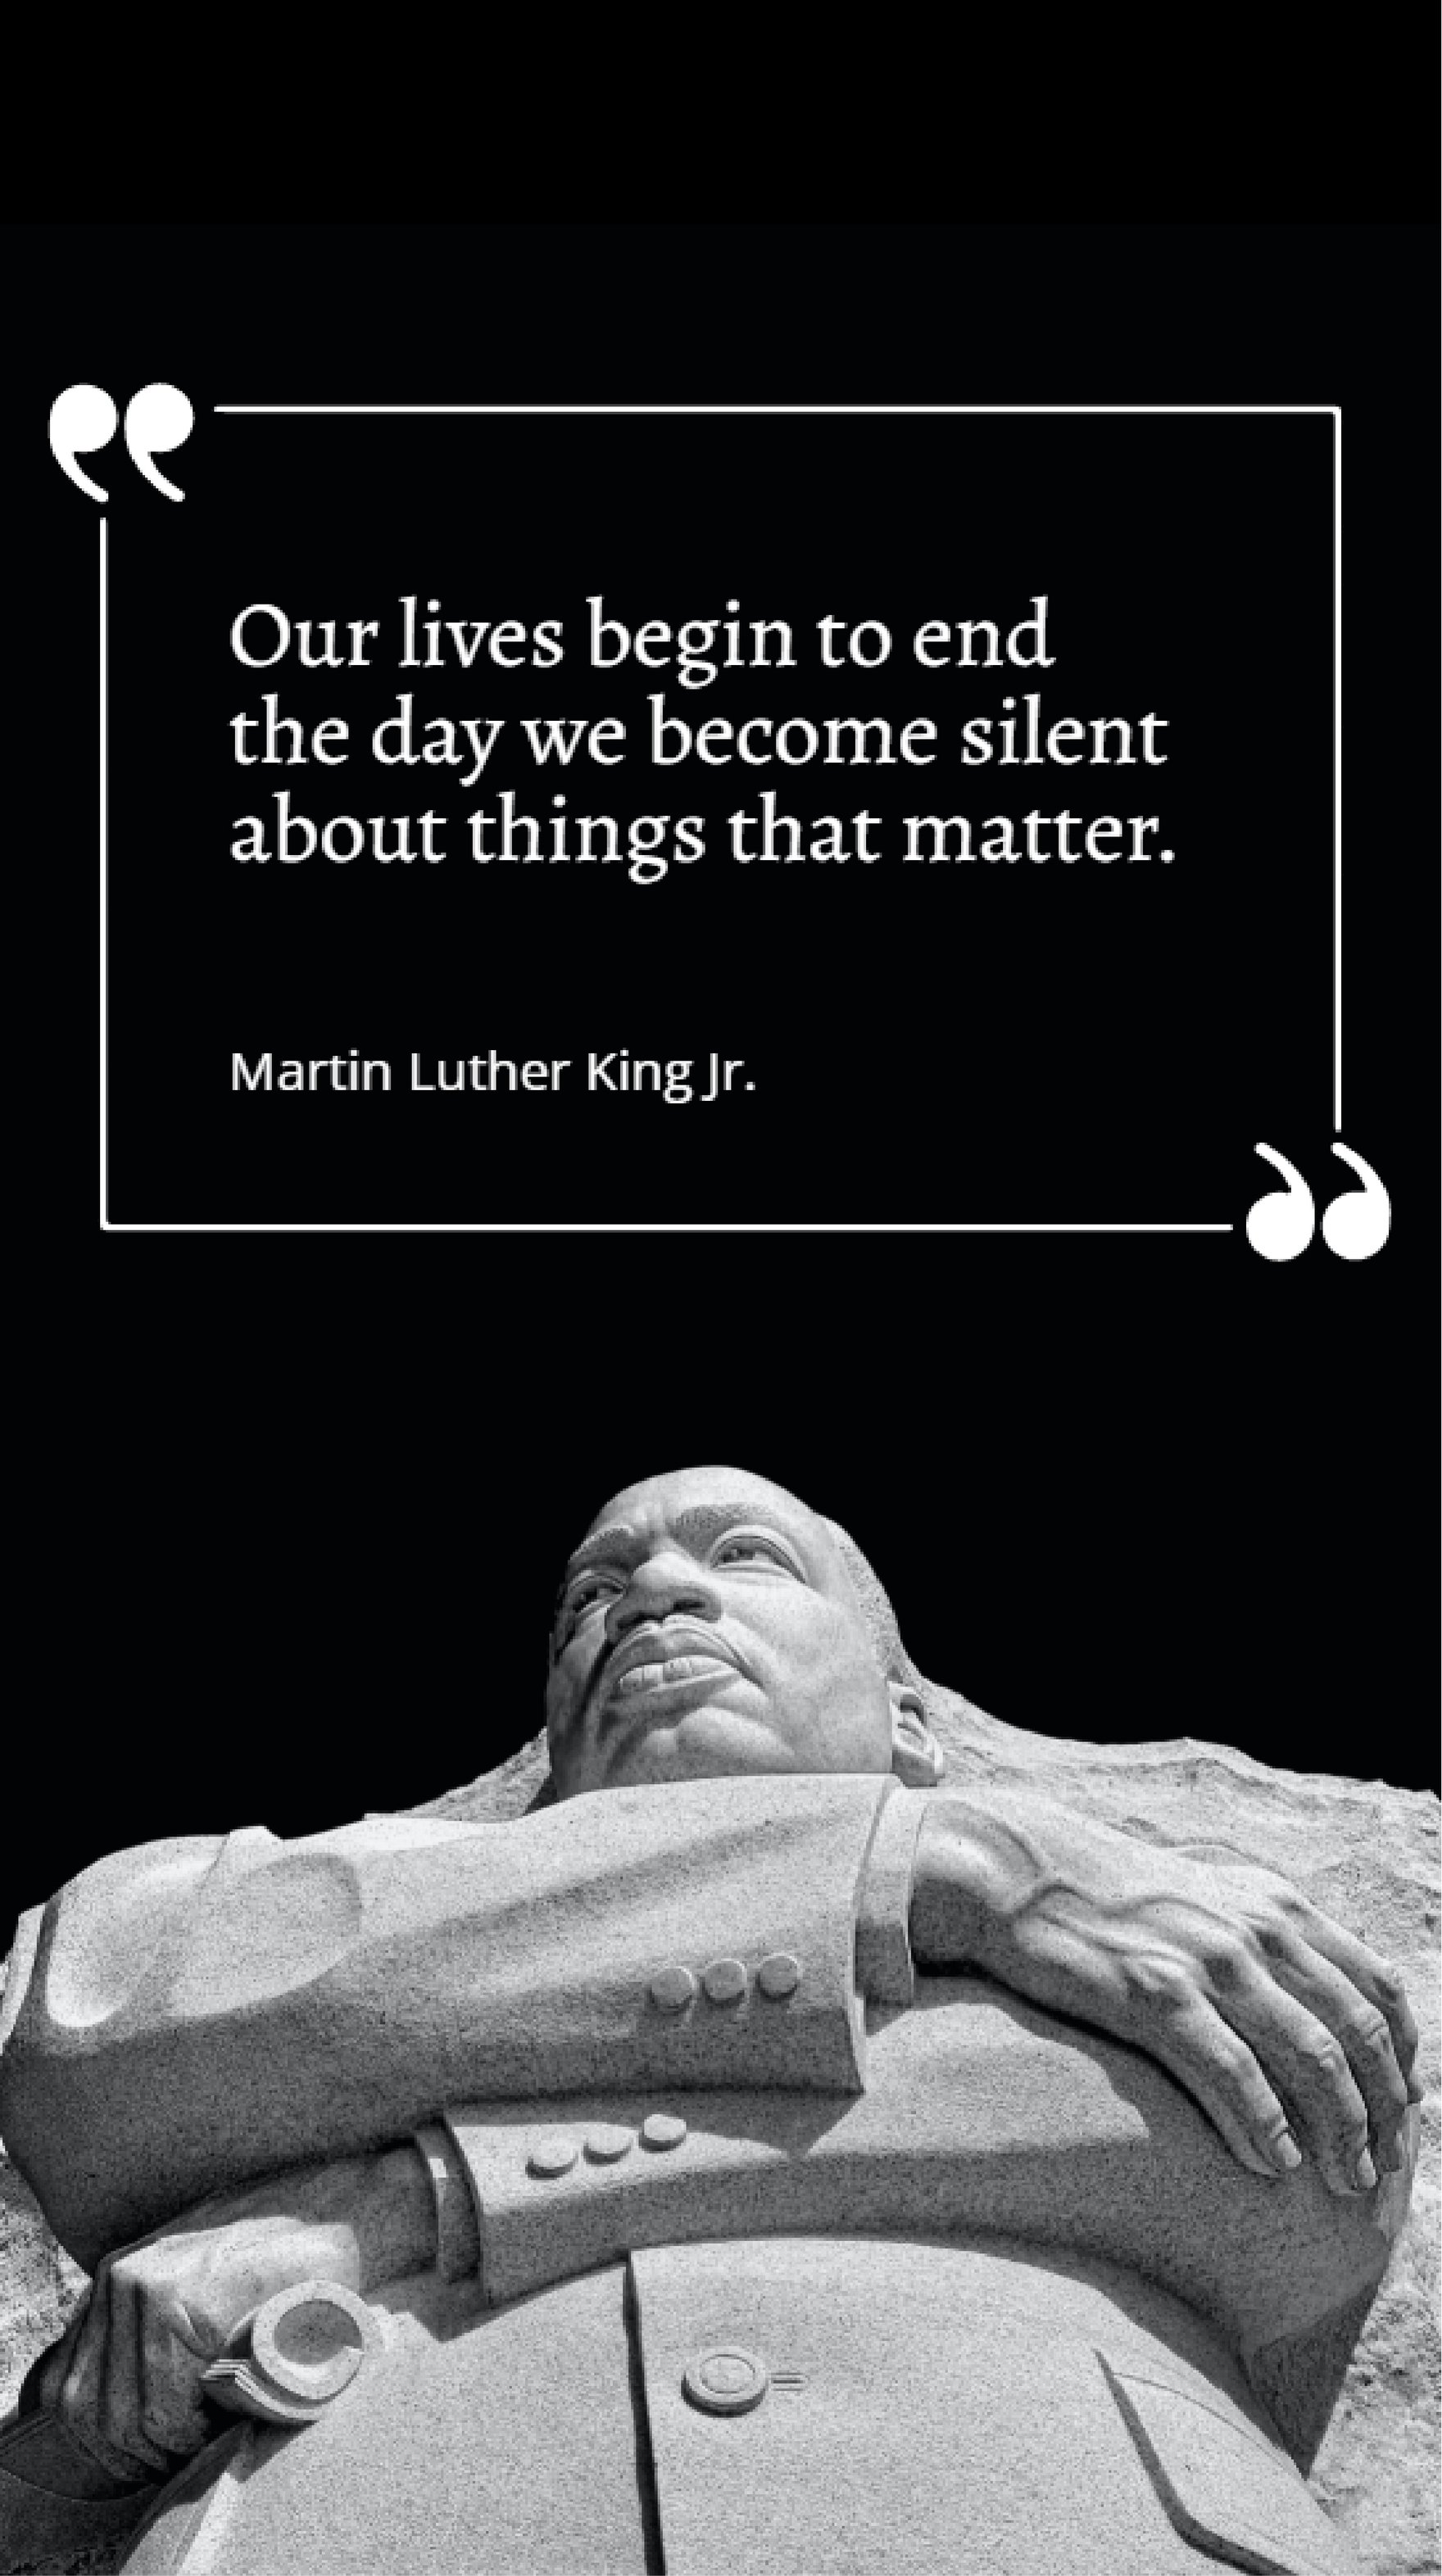 Martin Luther King Jr. - Our lives begin to end the day we become silent about things that matter